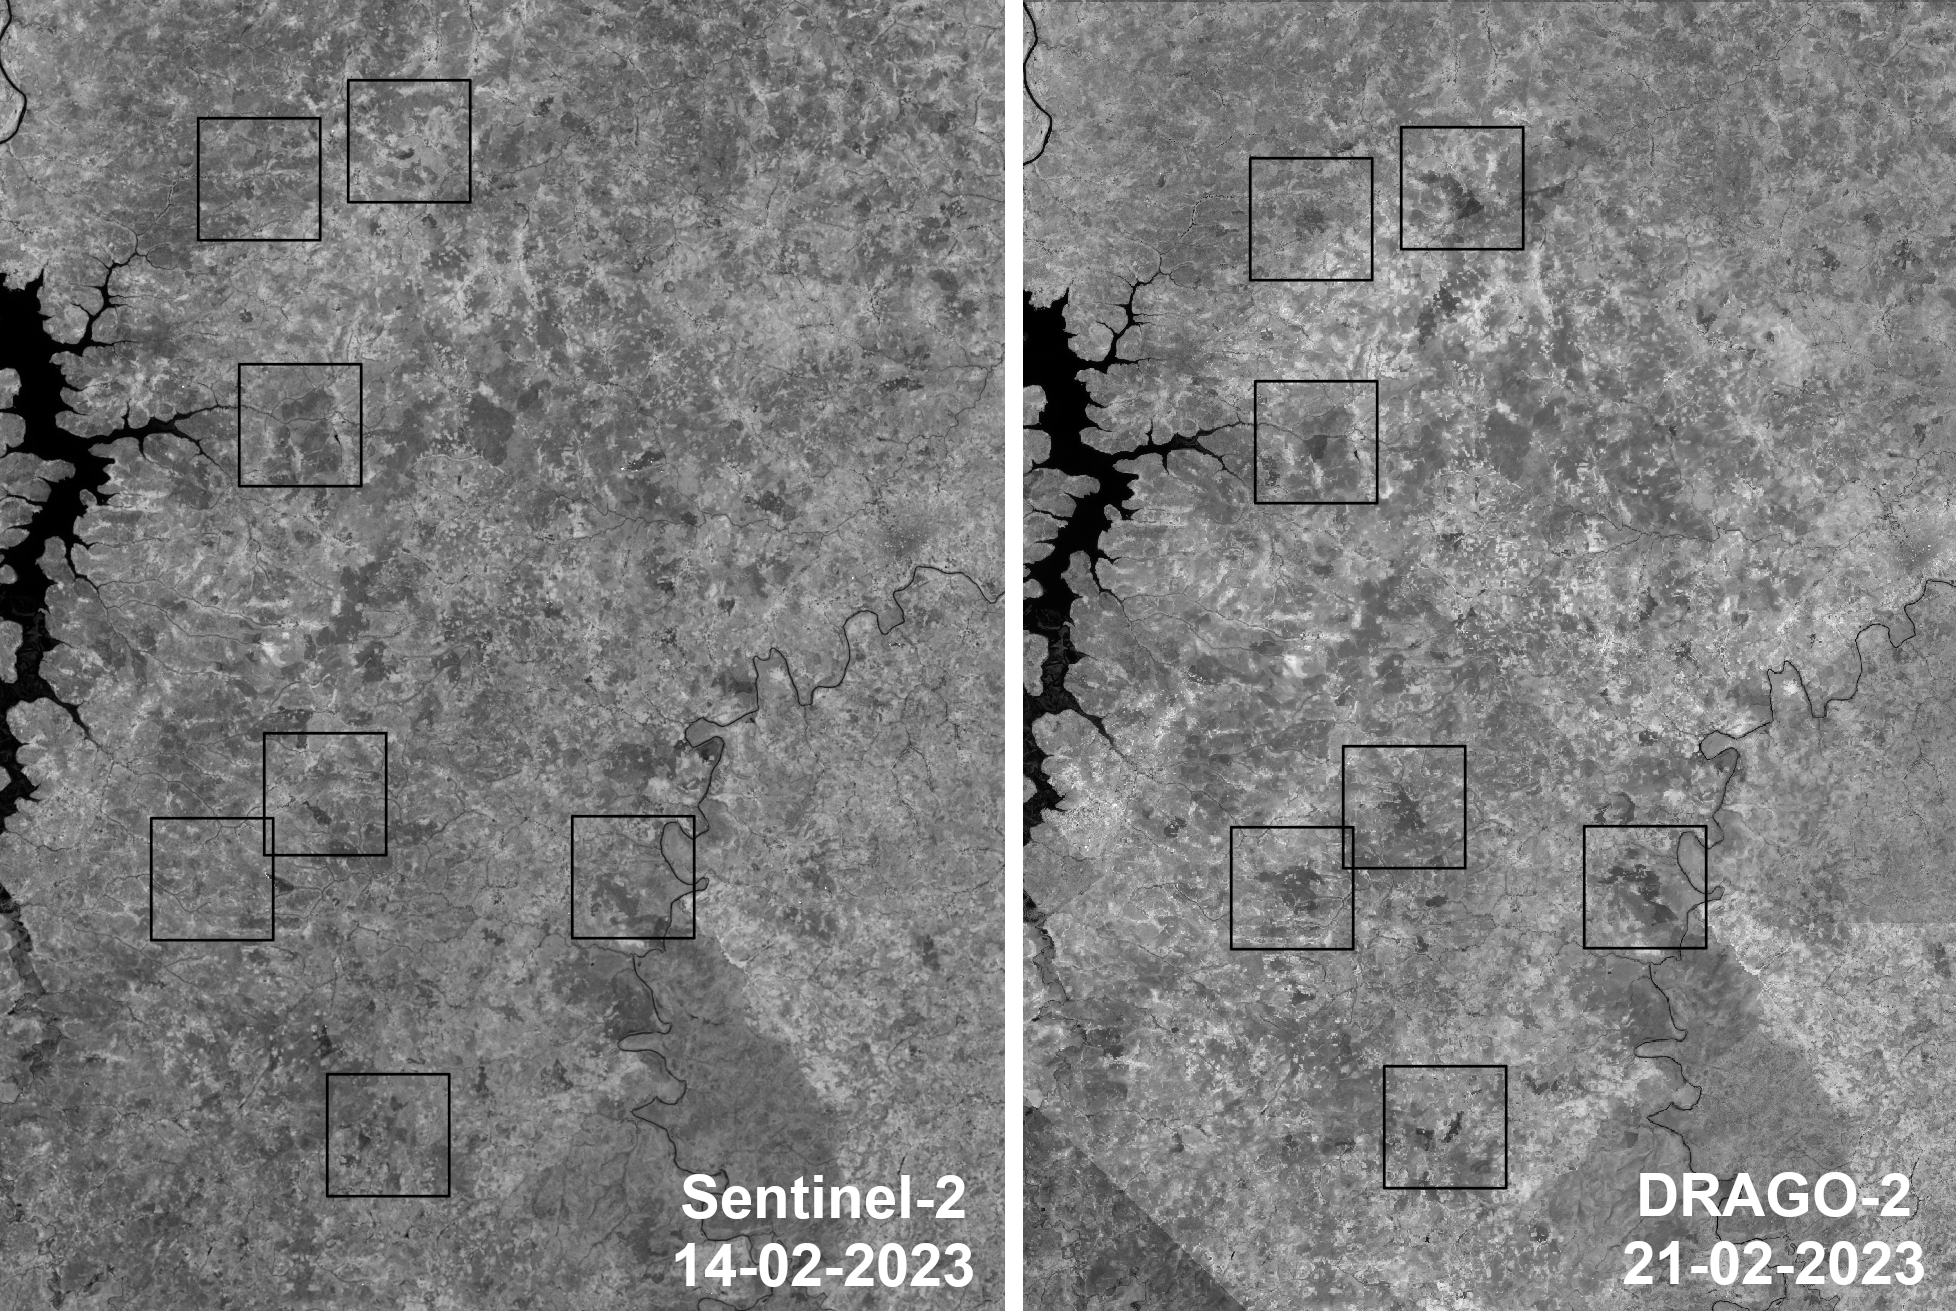 Comparison between the images from Sentinel-2 and DRACO-2, which show the development of forest fires, and the initiation of new outbursts in Mali, between 14th and 21st February 2023. The squares show the burnt zones. Credit: IACTEC